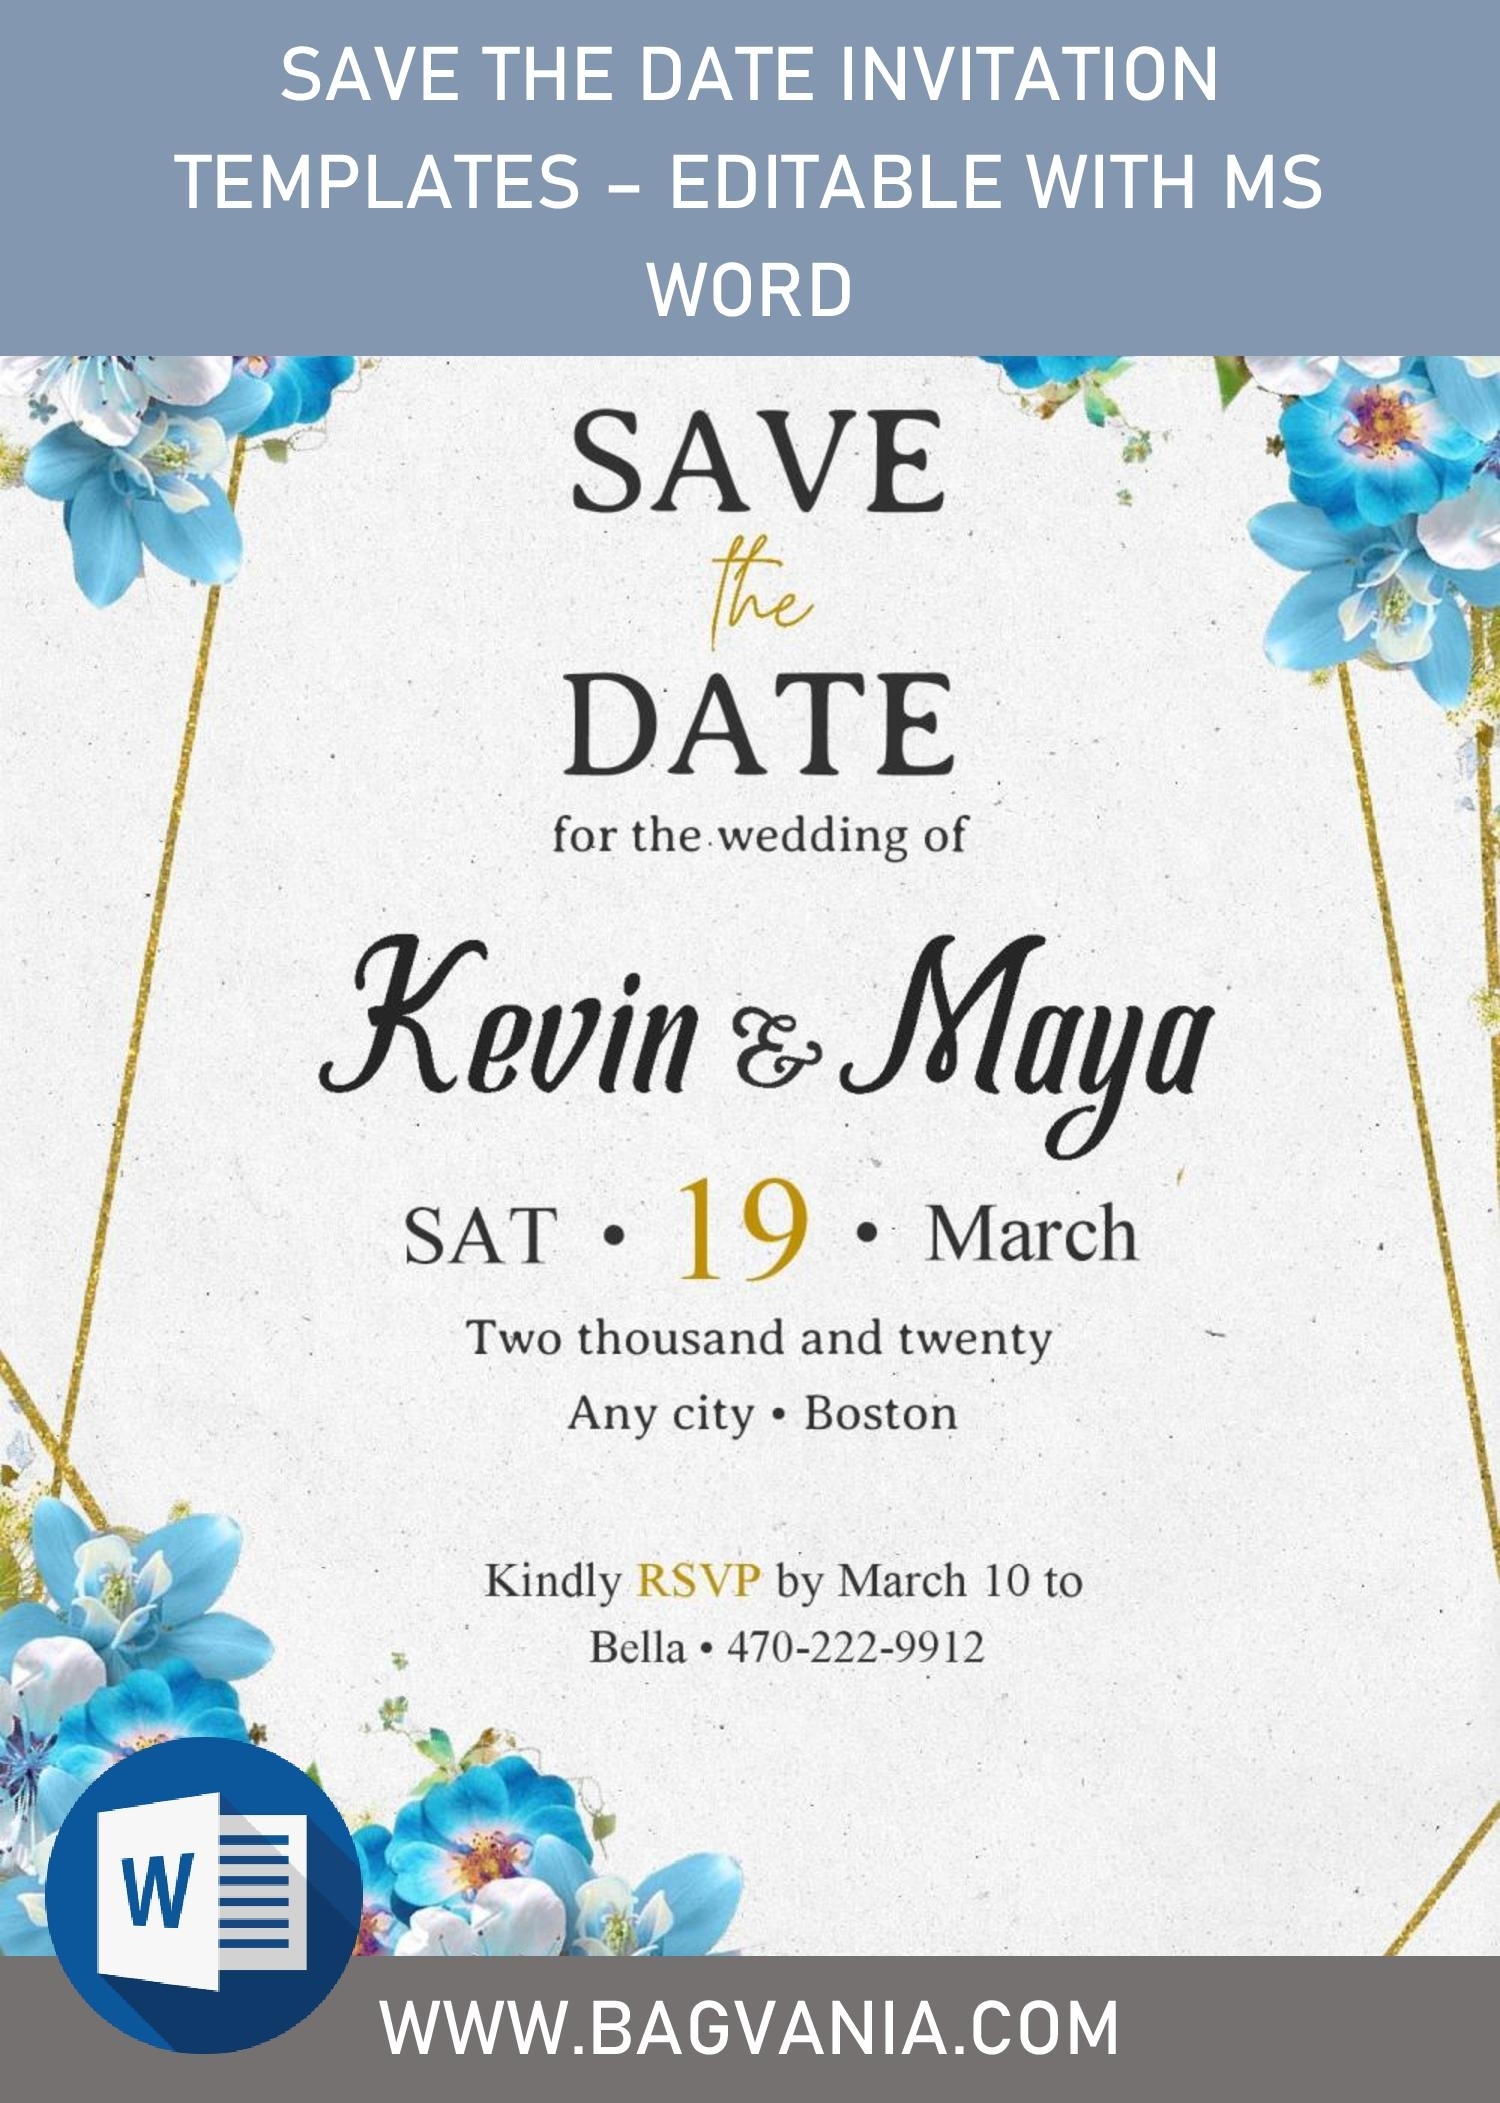 Save The Date Invitation Templates - Editable With Ms Word | Free Intended For Save The Date Template Word